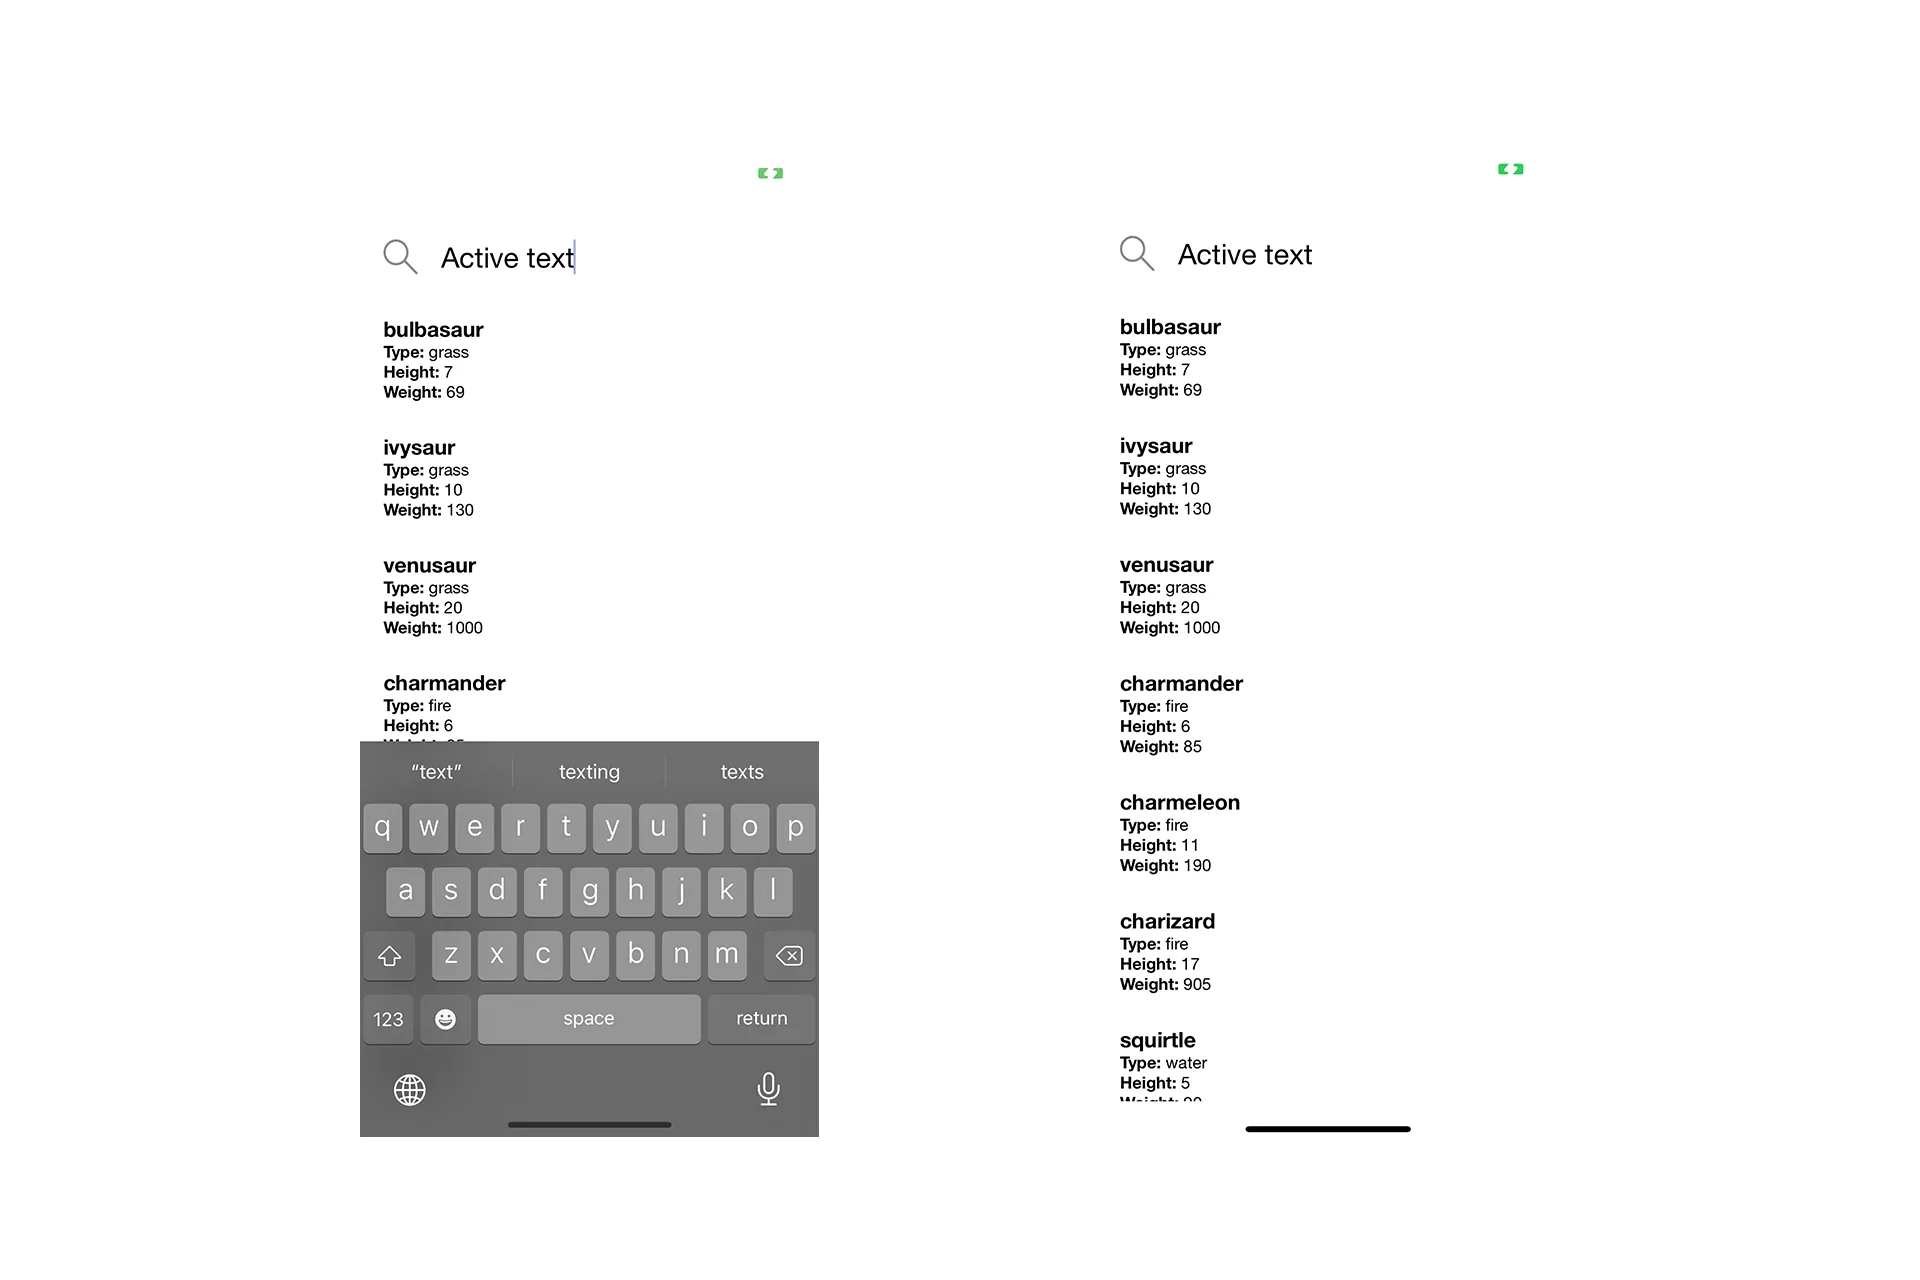 A screenshot showing the application with a keyboard, with text saying "active text" in the search bar on the left and the same image without a keyboard on the right. This visual is meant to demonstrate that if you touch the screen or the return key, it will dismiss the keyboard.